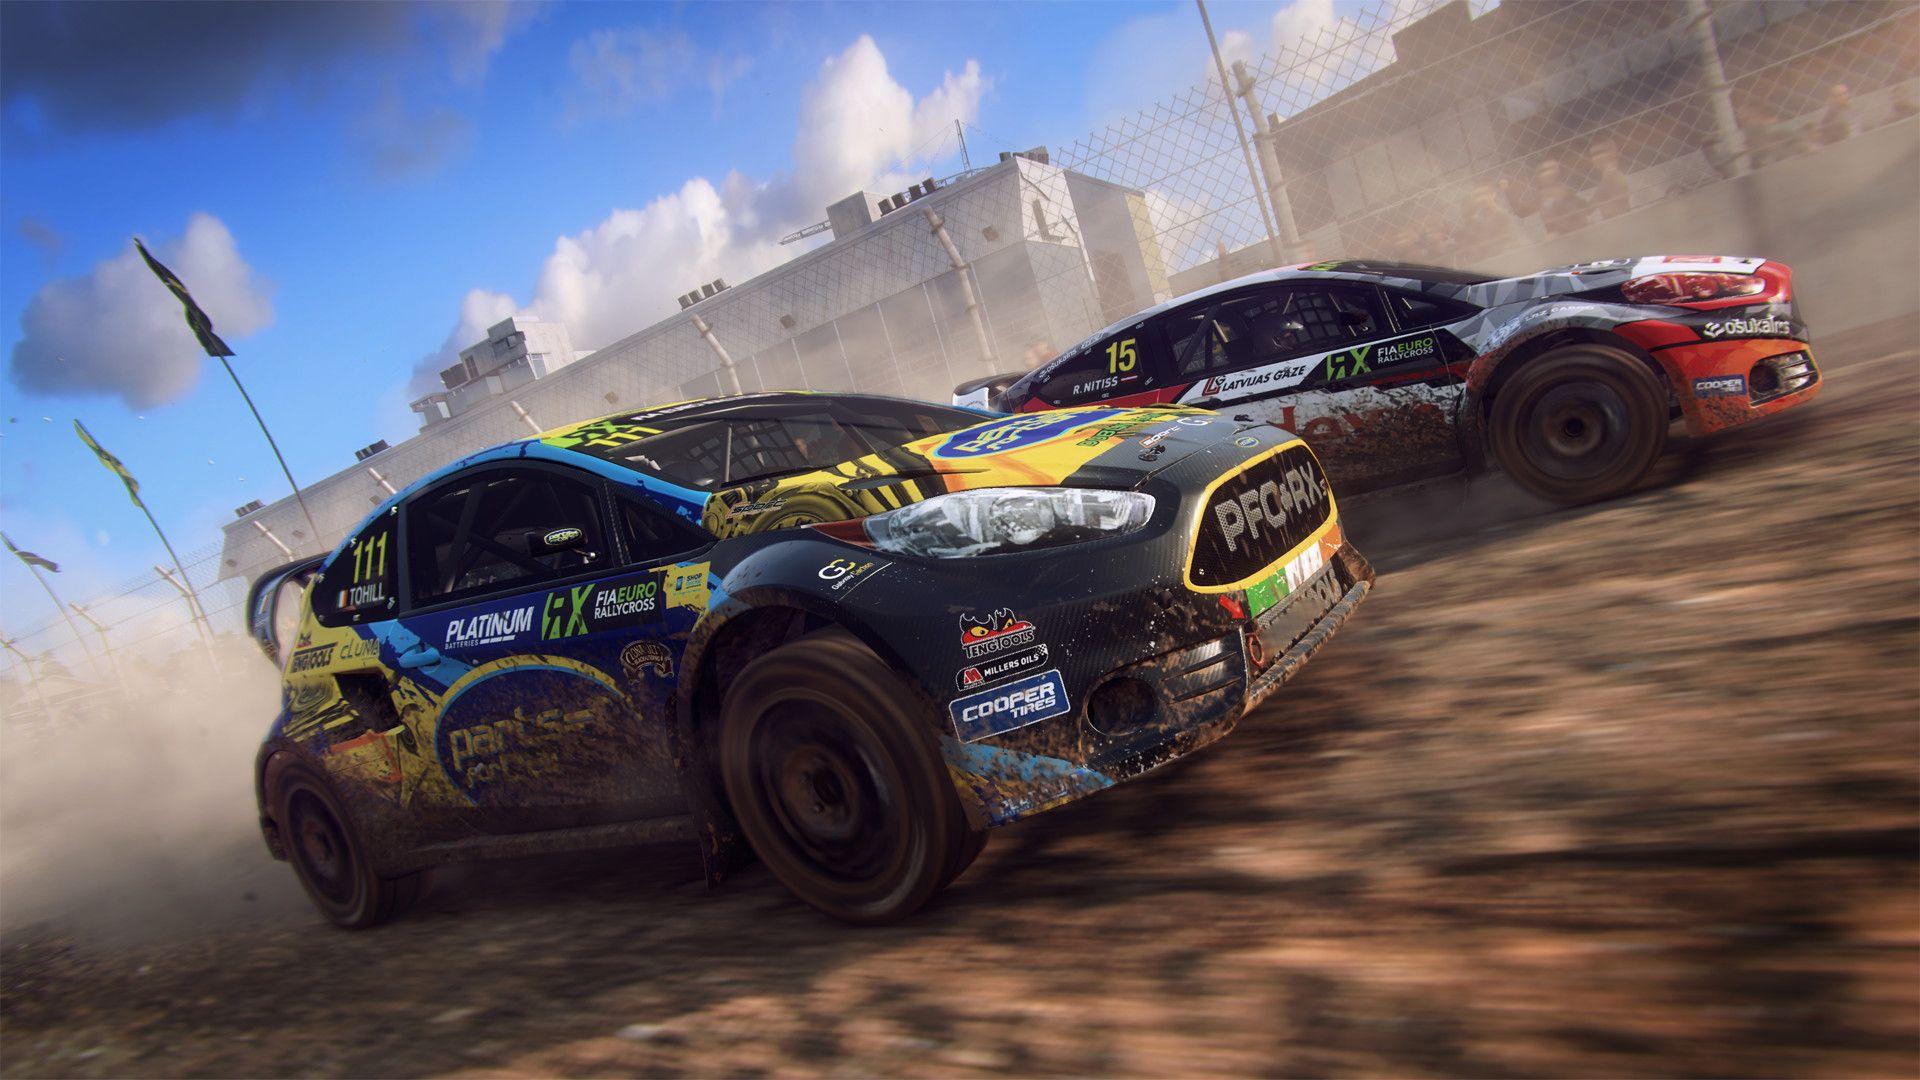 DiRT Rally Wallpapers